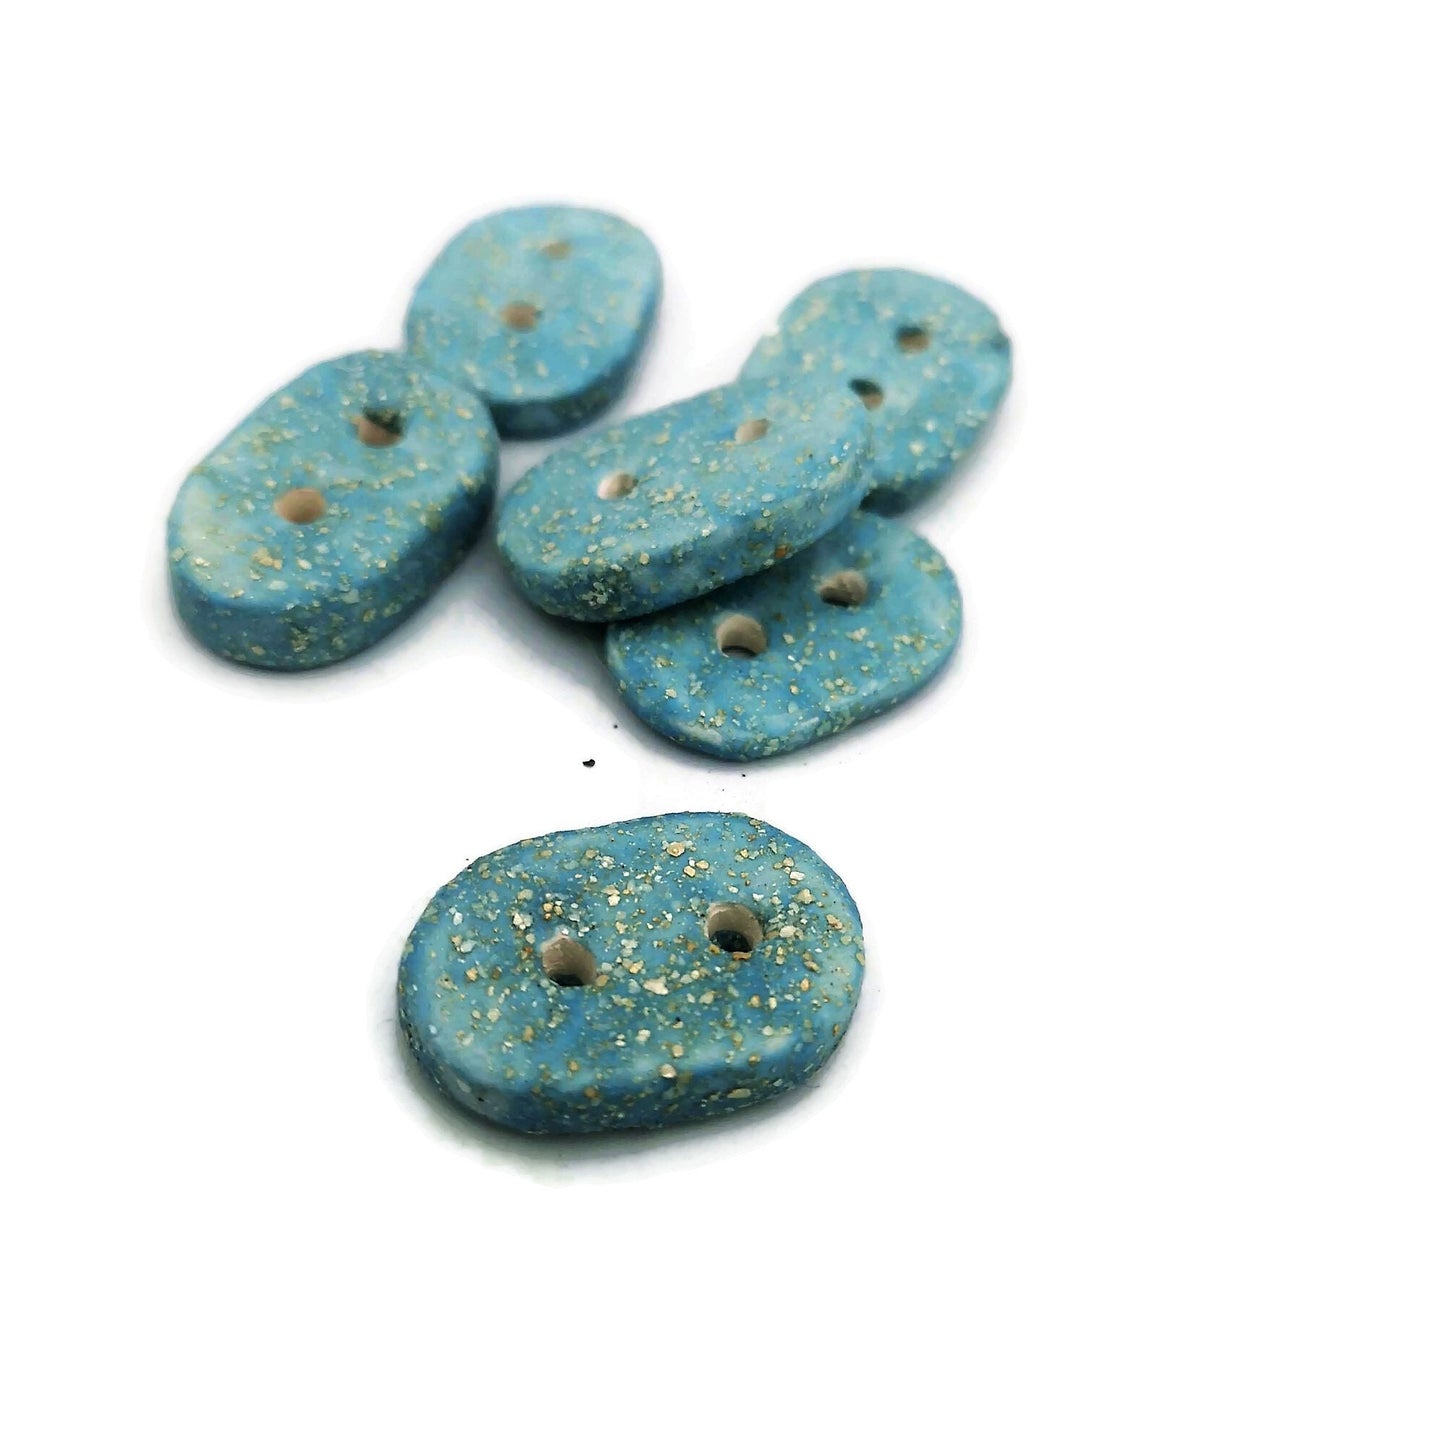 6Pc Handmade Ceramic Oval Sewing Button For Clothing, 3 cm 2 Hole Sparkly Turquoise Blue Decorative Knitting Button, Lightweight and Smooth - Ceramica Ana Rafael